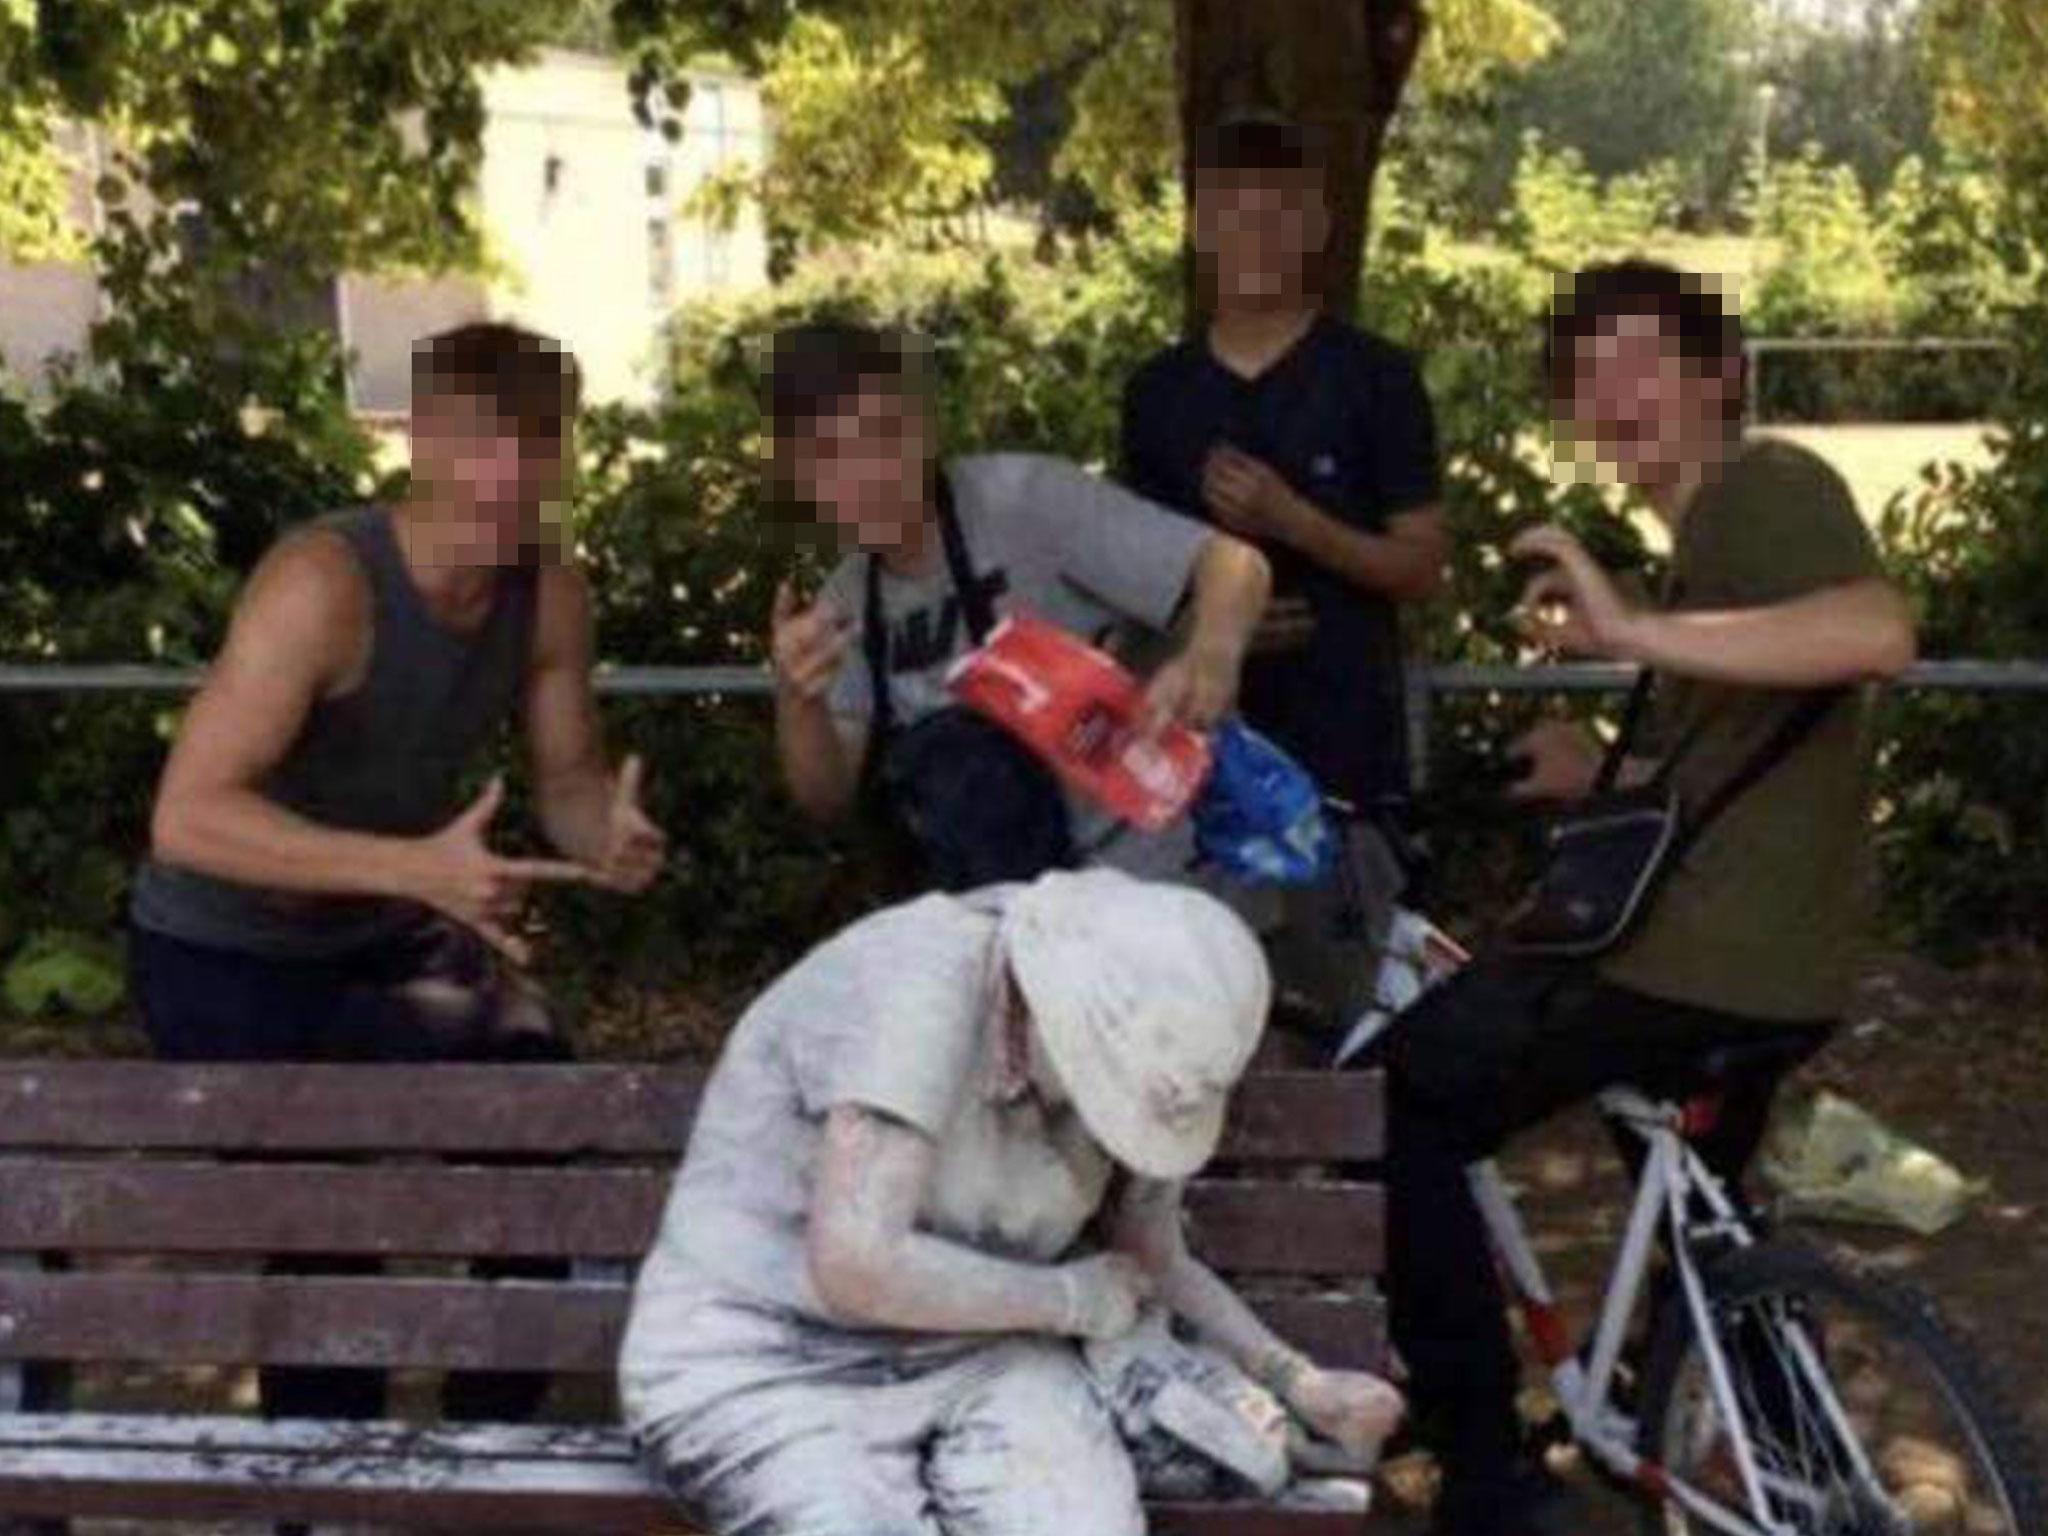 The image of four teenagers surrounding a woman covered in flour was originally shared on Snapchat